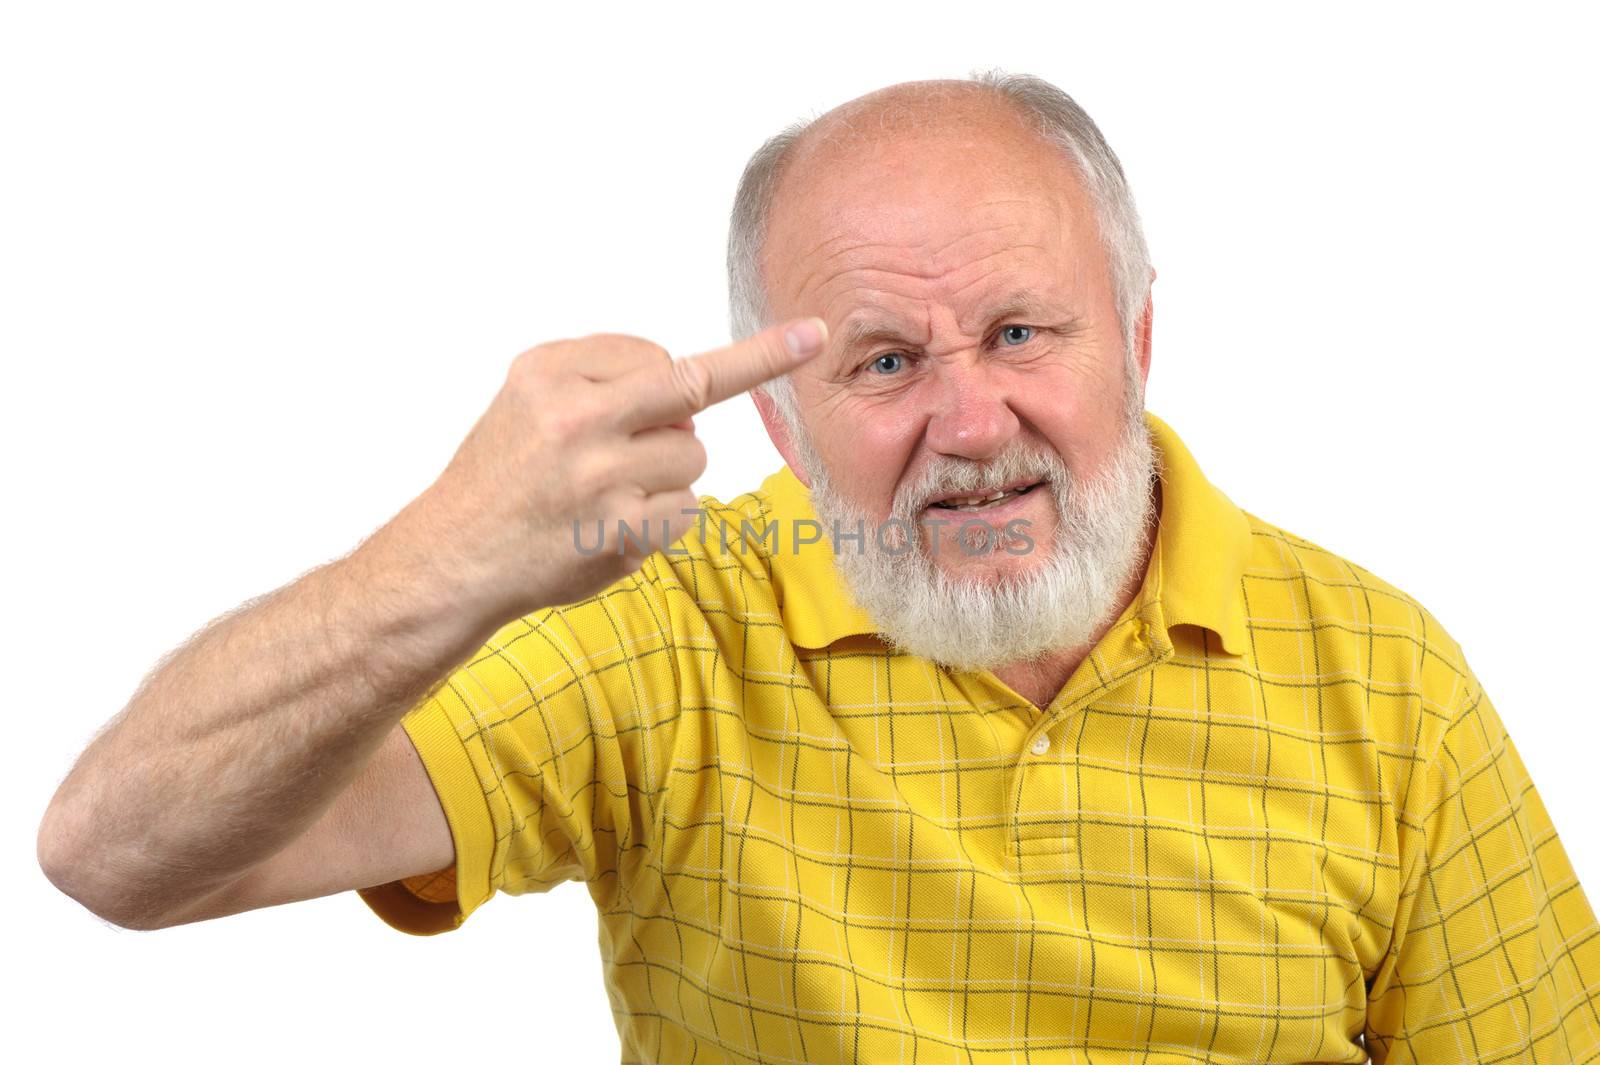 senior bald man shows fuck with middle finger, motion blur at hand